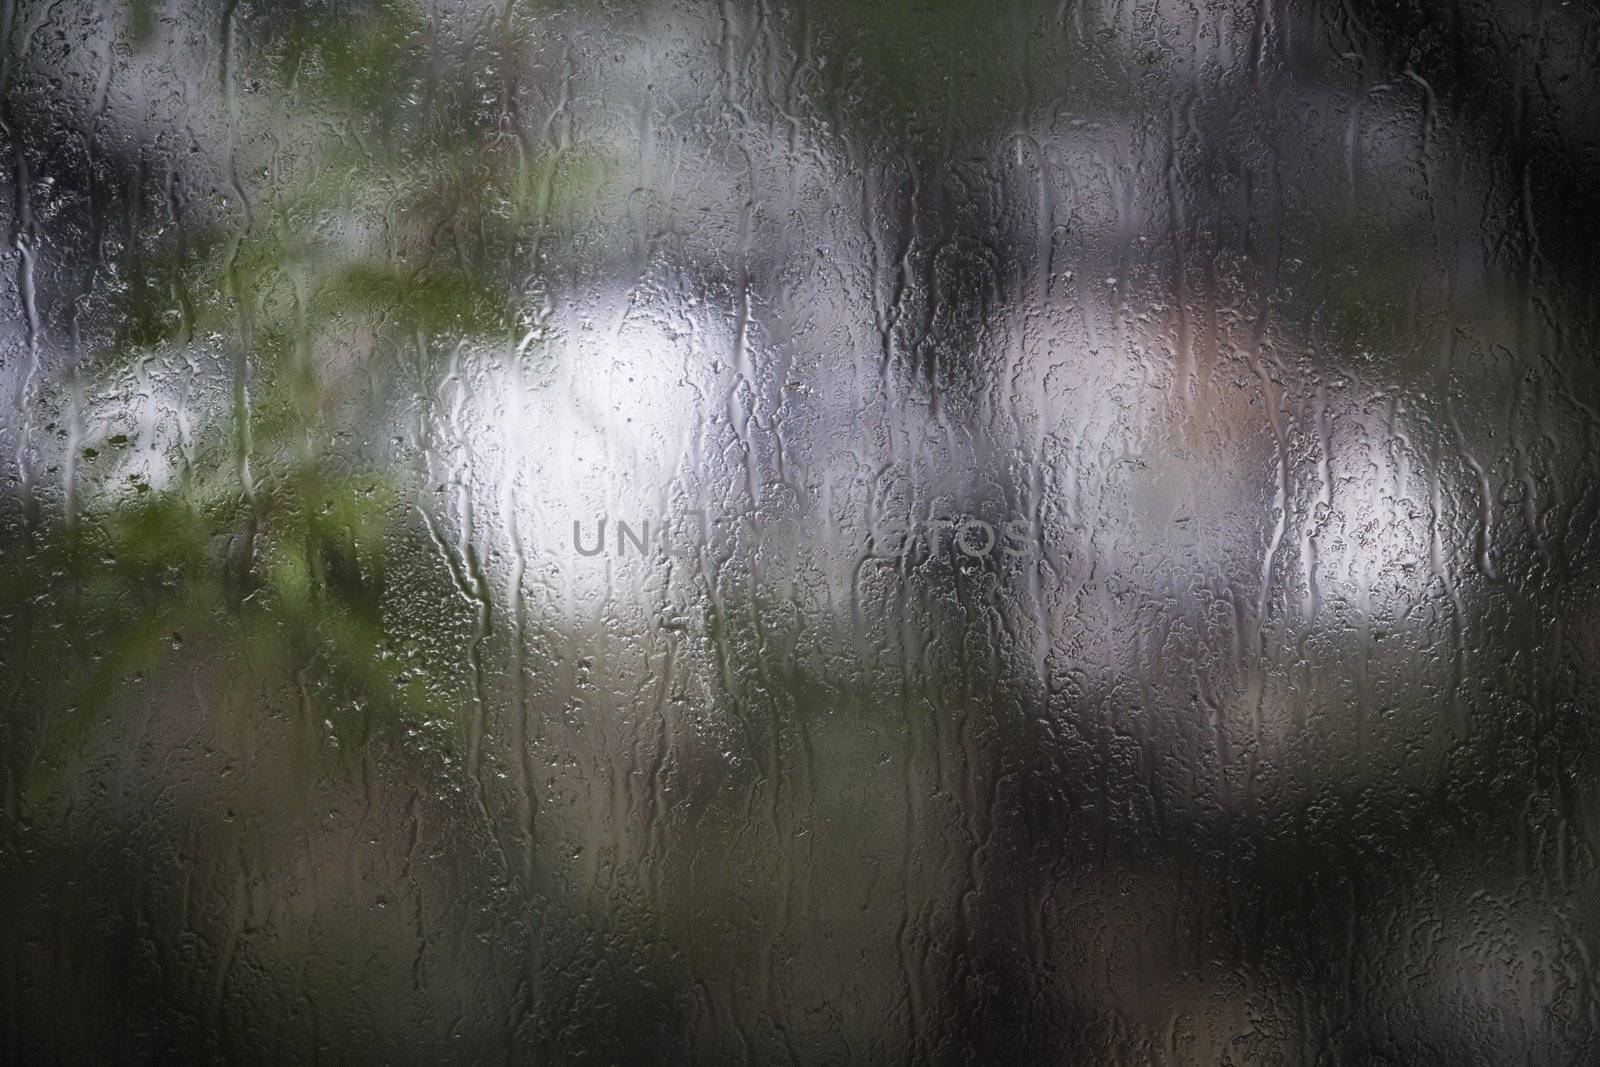 Rain streaked window looking out to foliage